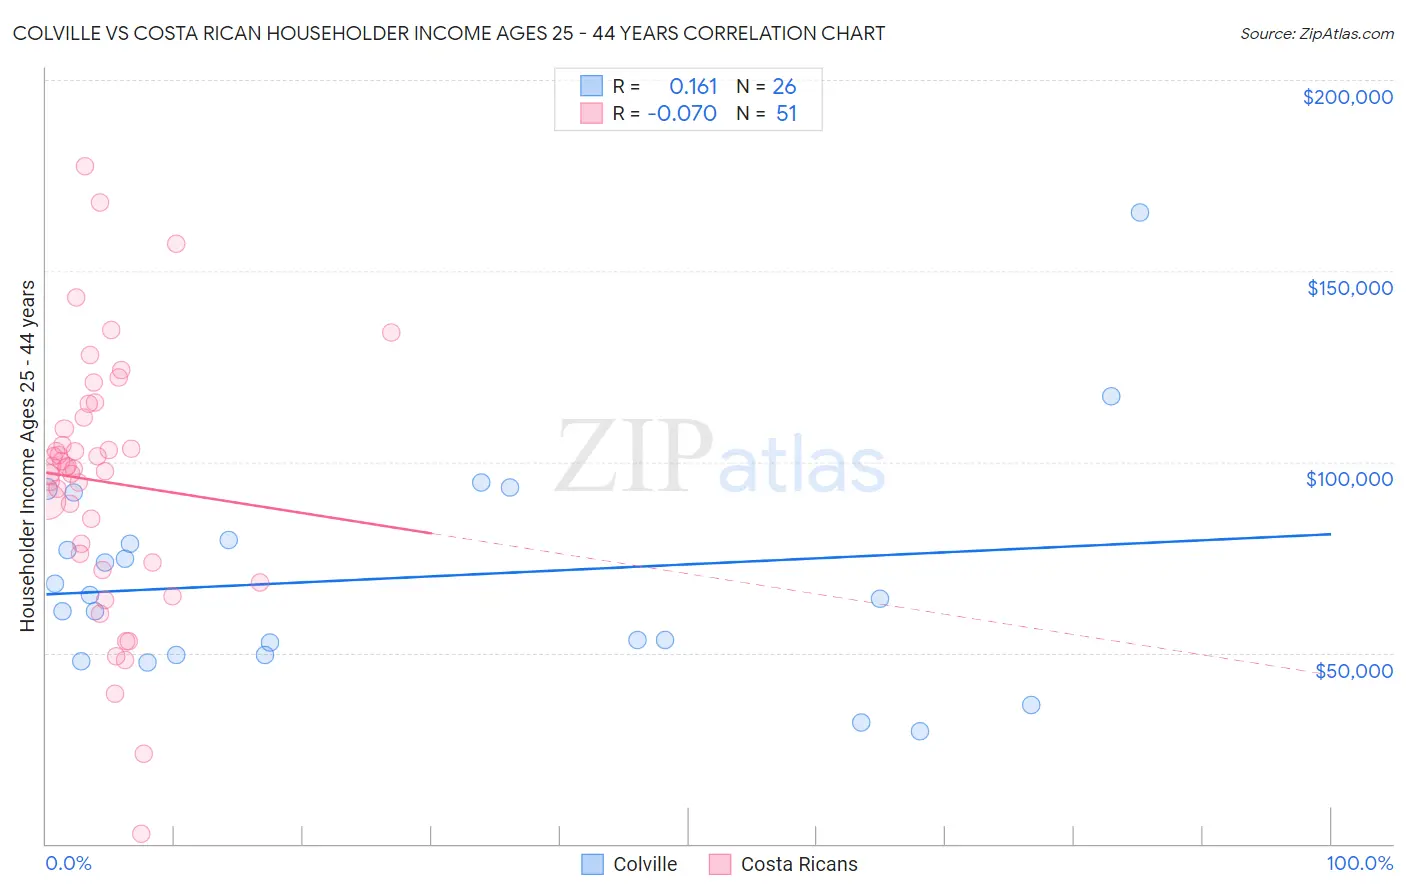 Colville vs Costa Rican Householder Income Ages 25 - 44 years